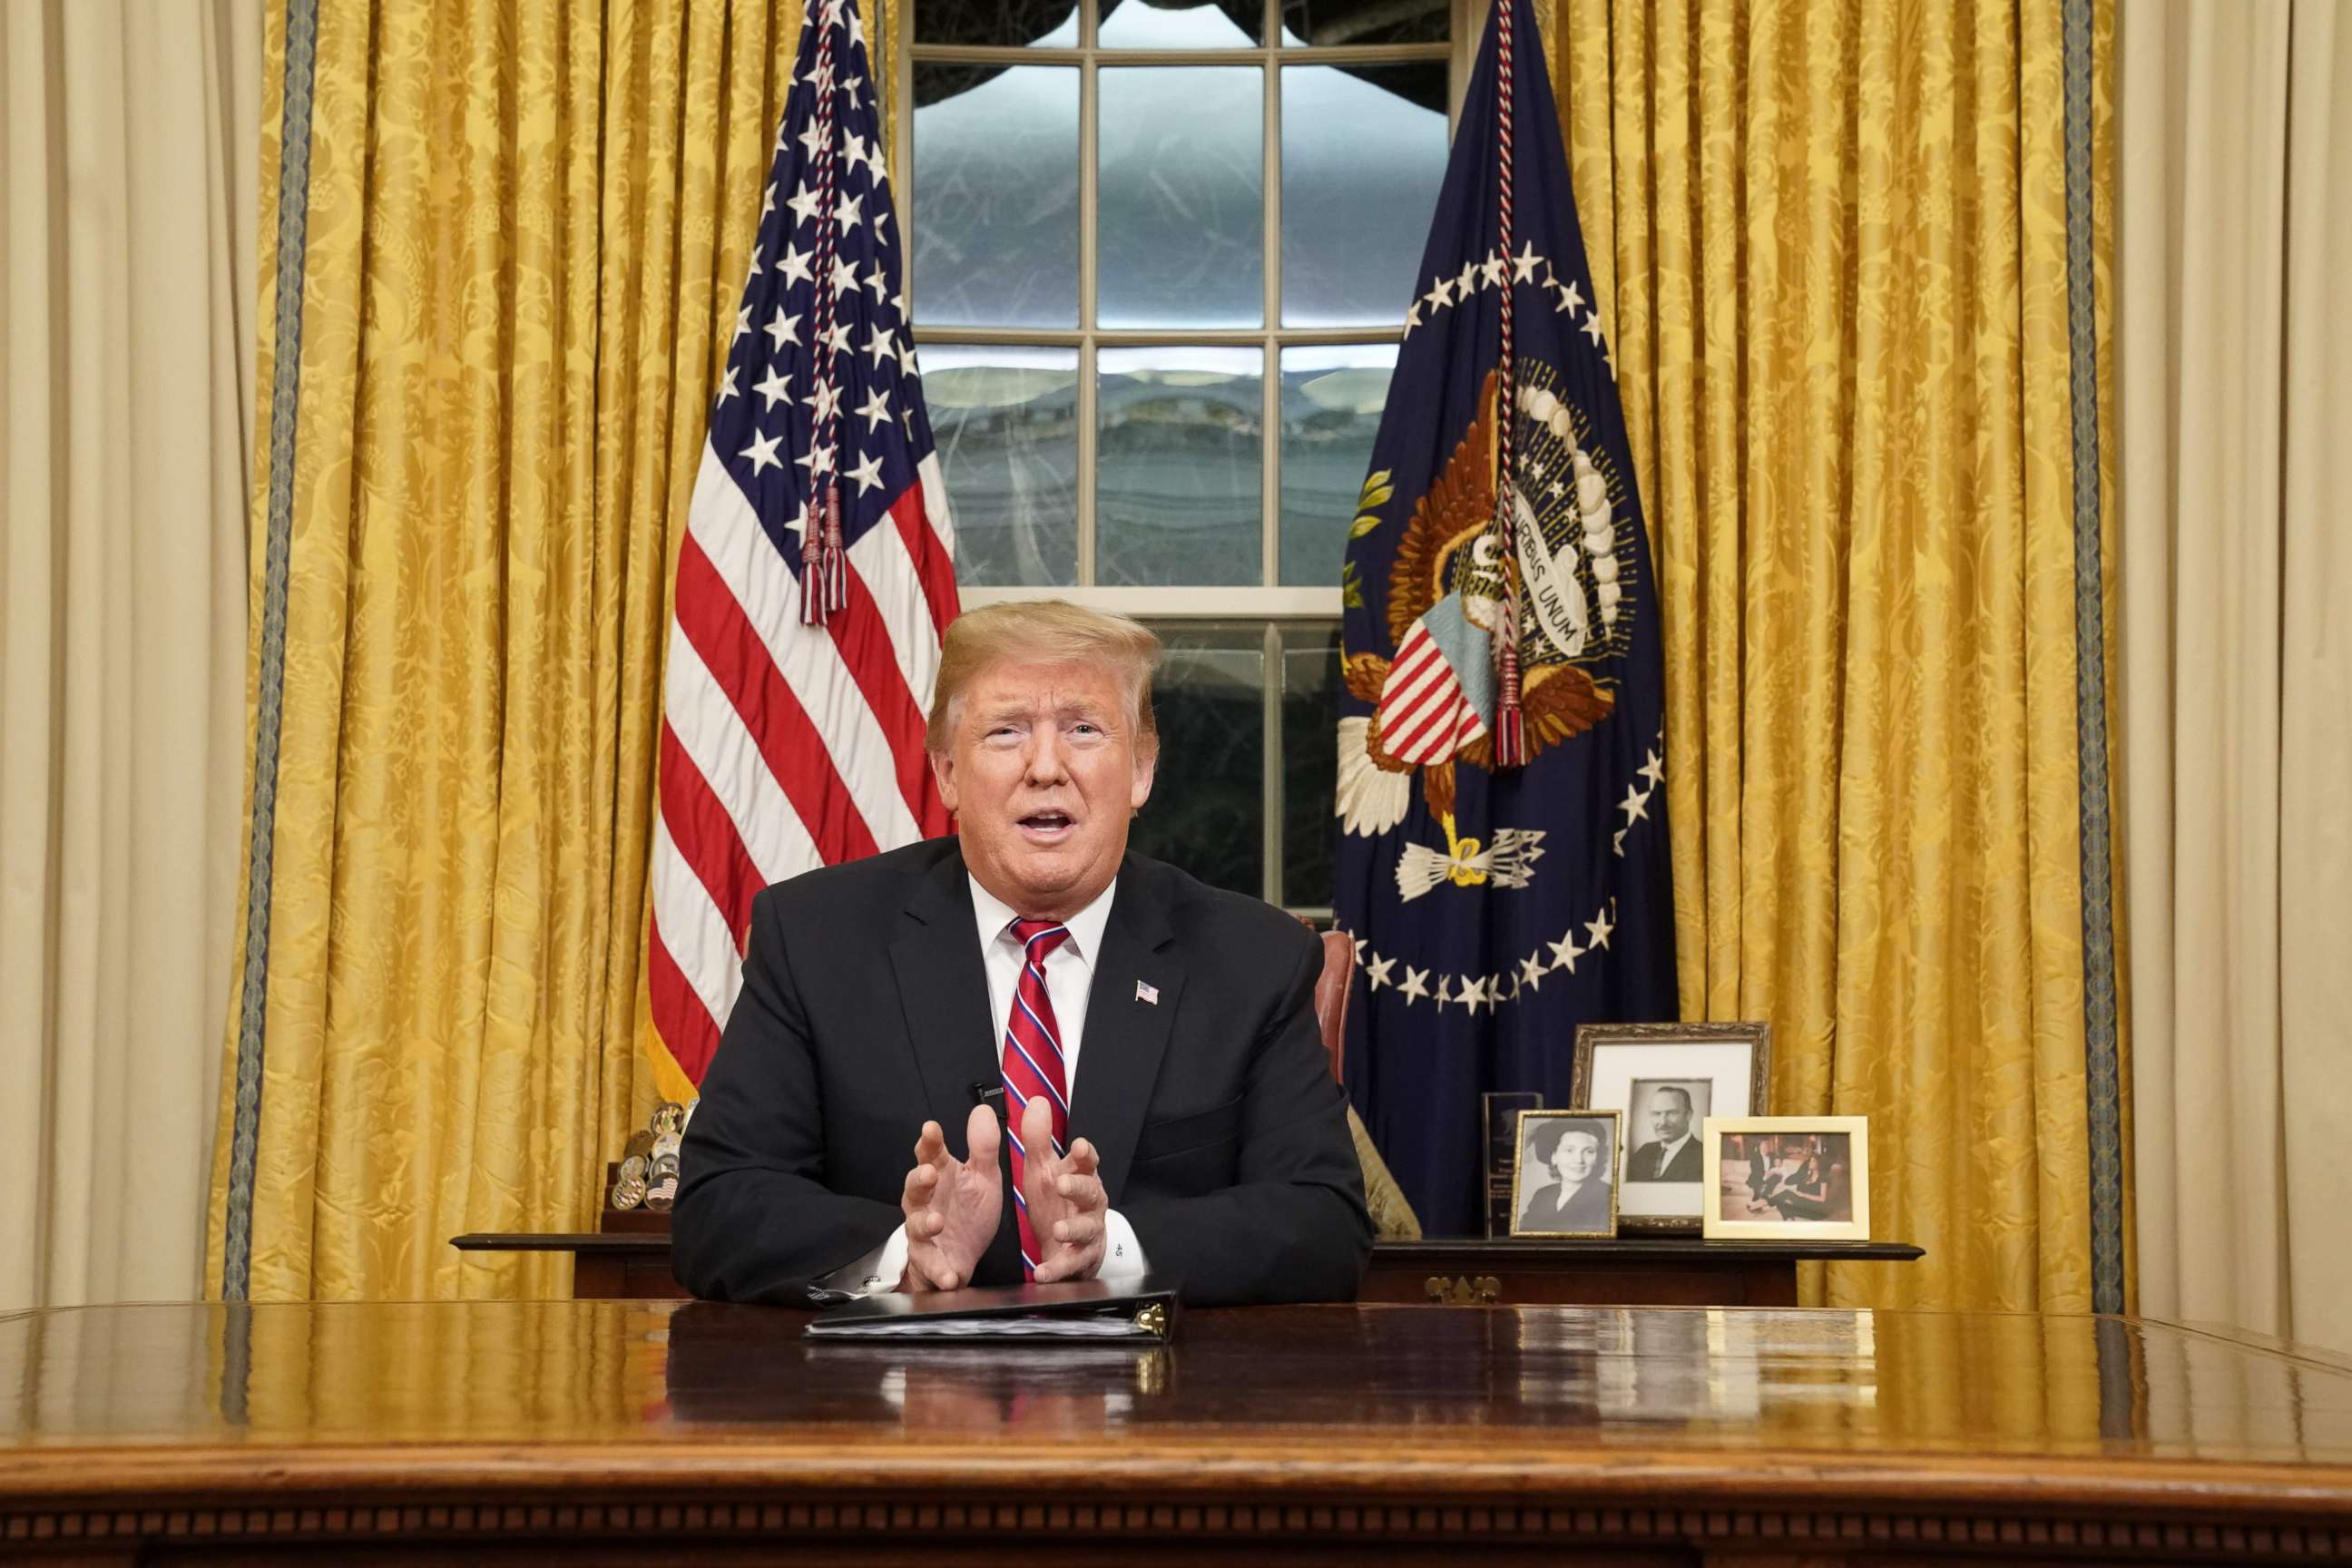 PHOTO: President Donald Trump delivers a televised address to the nation on funding for a border wall from the Oval Office of the White House in Washington, Jan. 8, 2019.